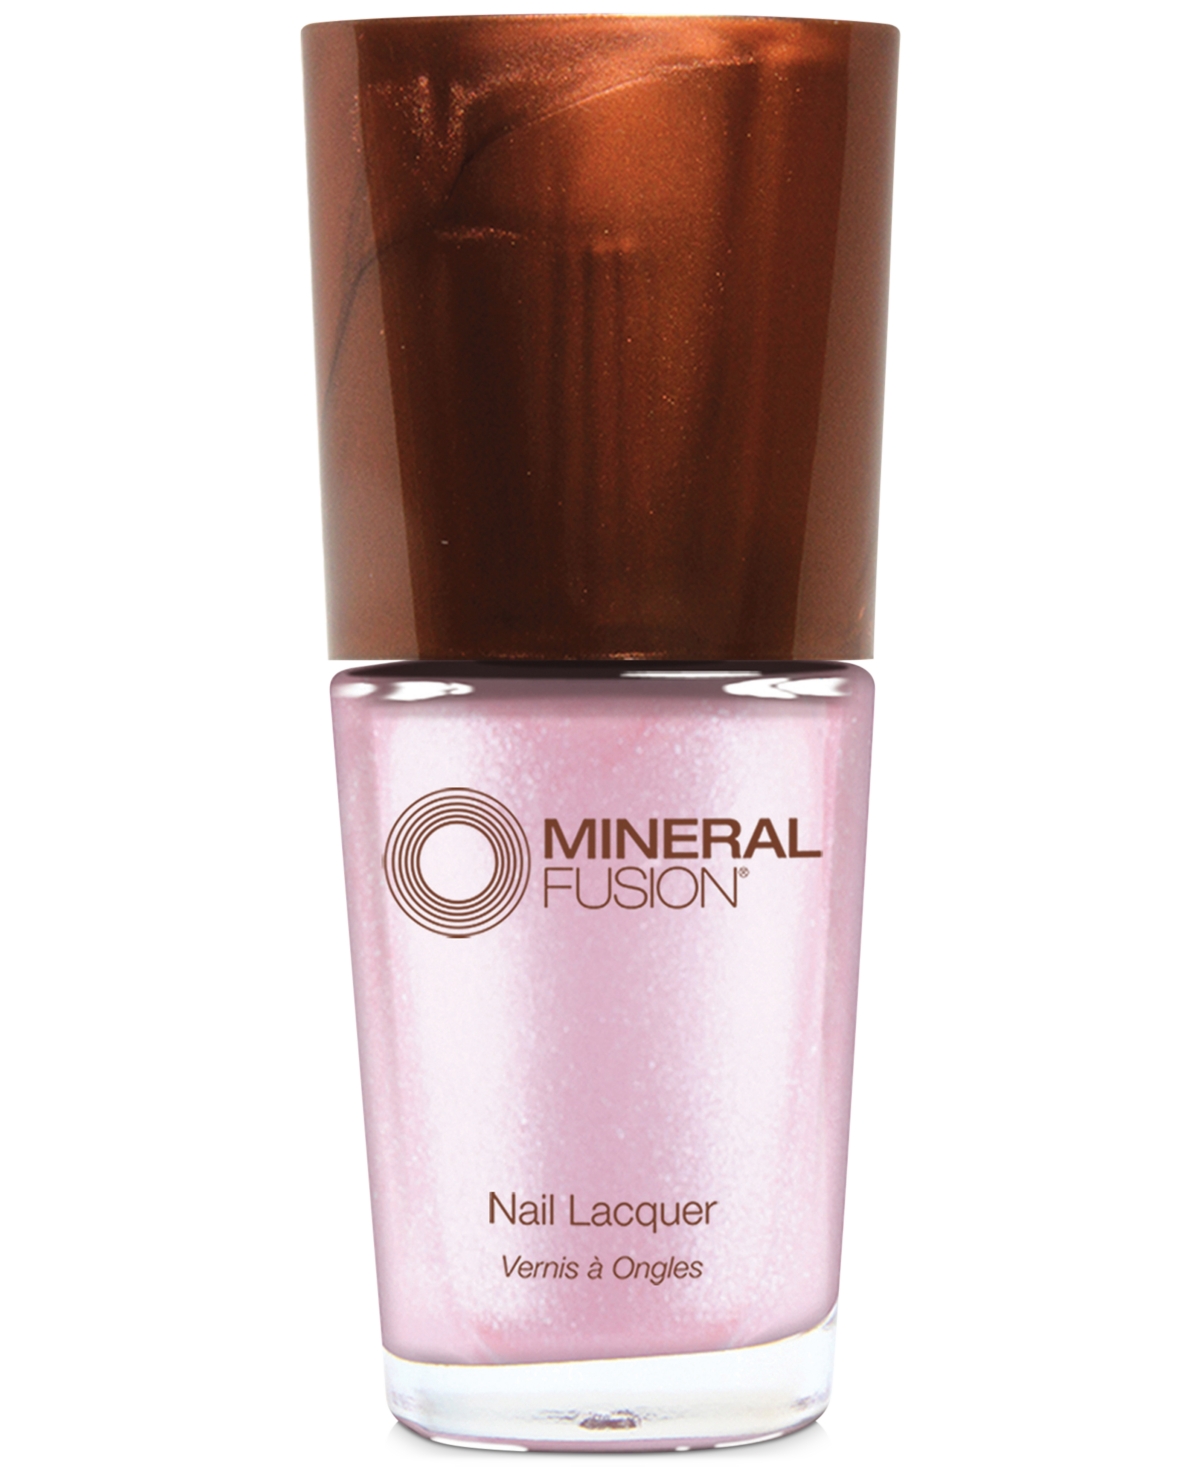 Nail Lacquer - Pink Fire Opal (iridescent pink/sheer fi